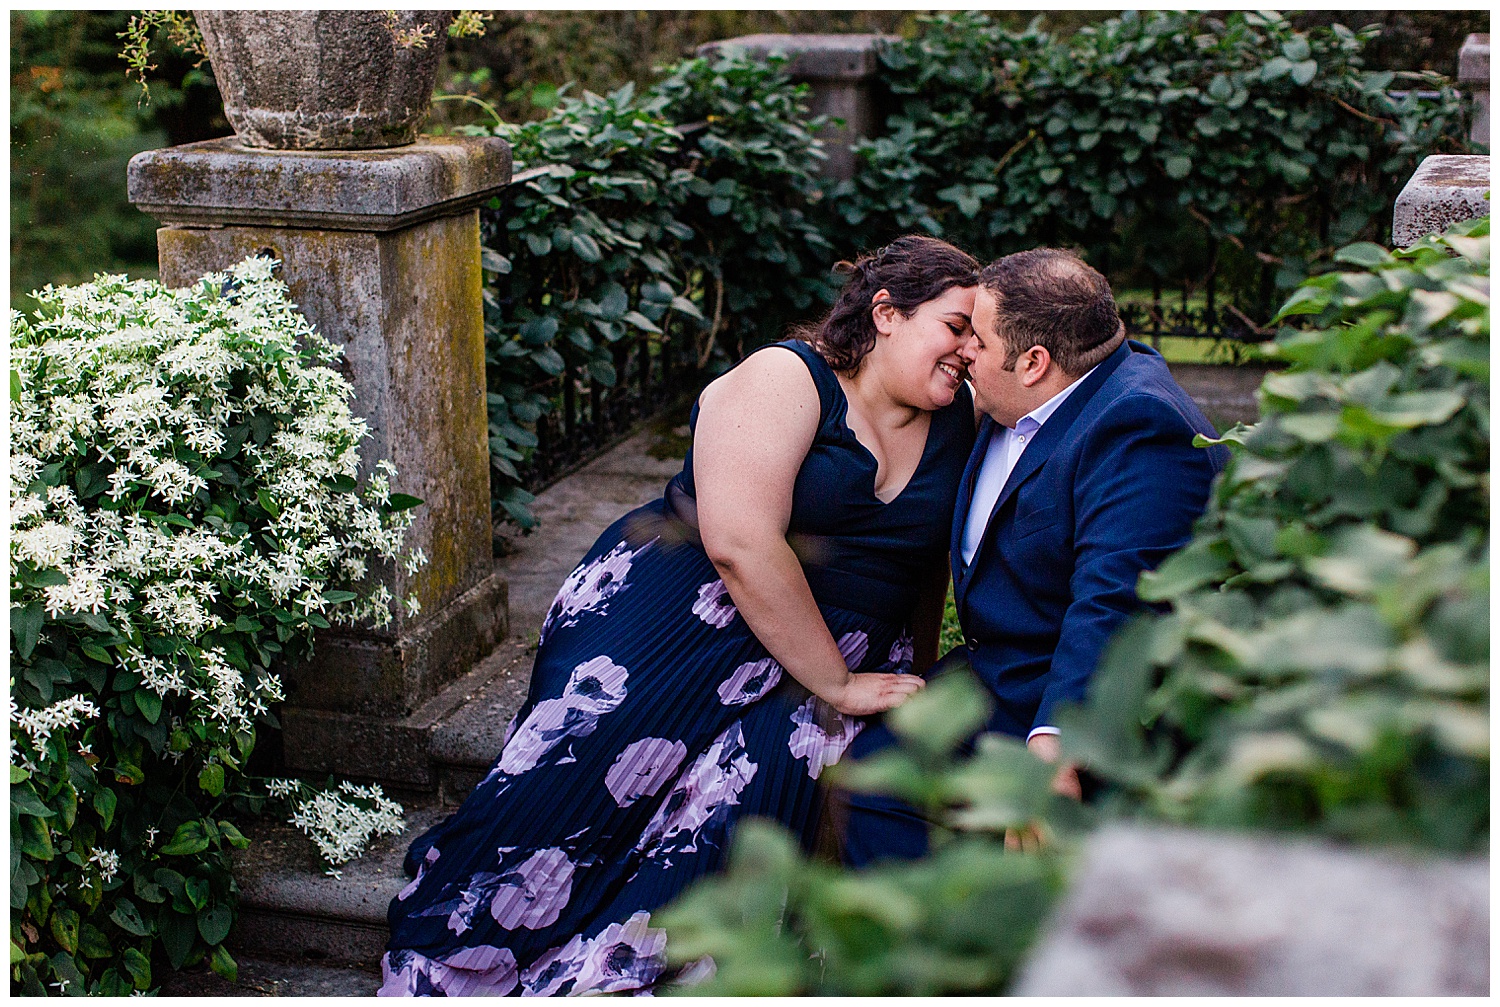 Couple snuggle in overgrown stone patio